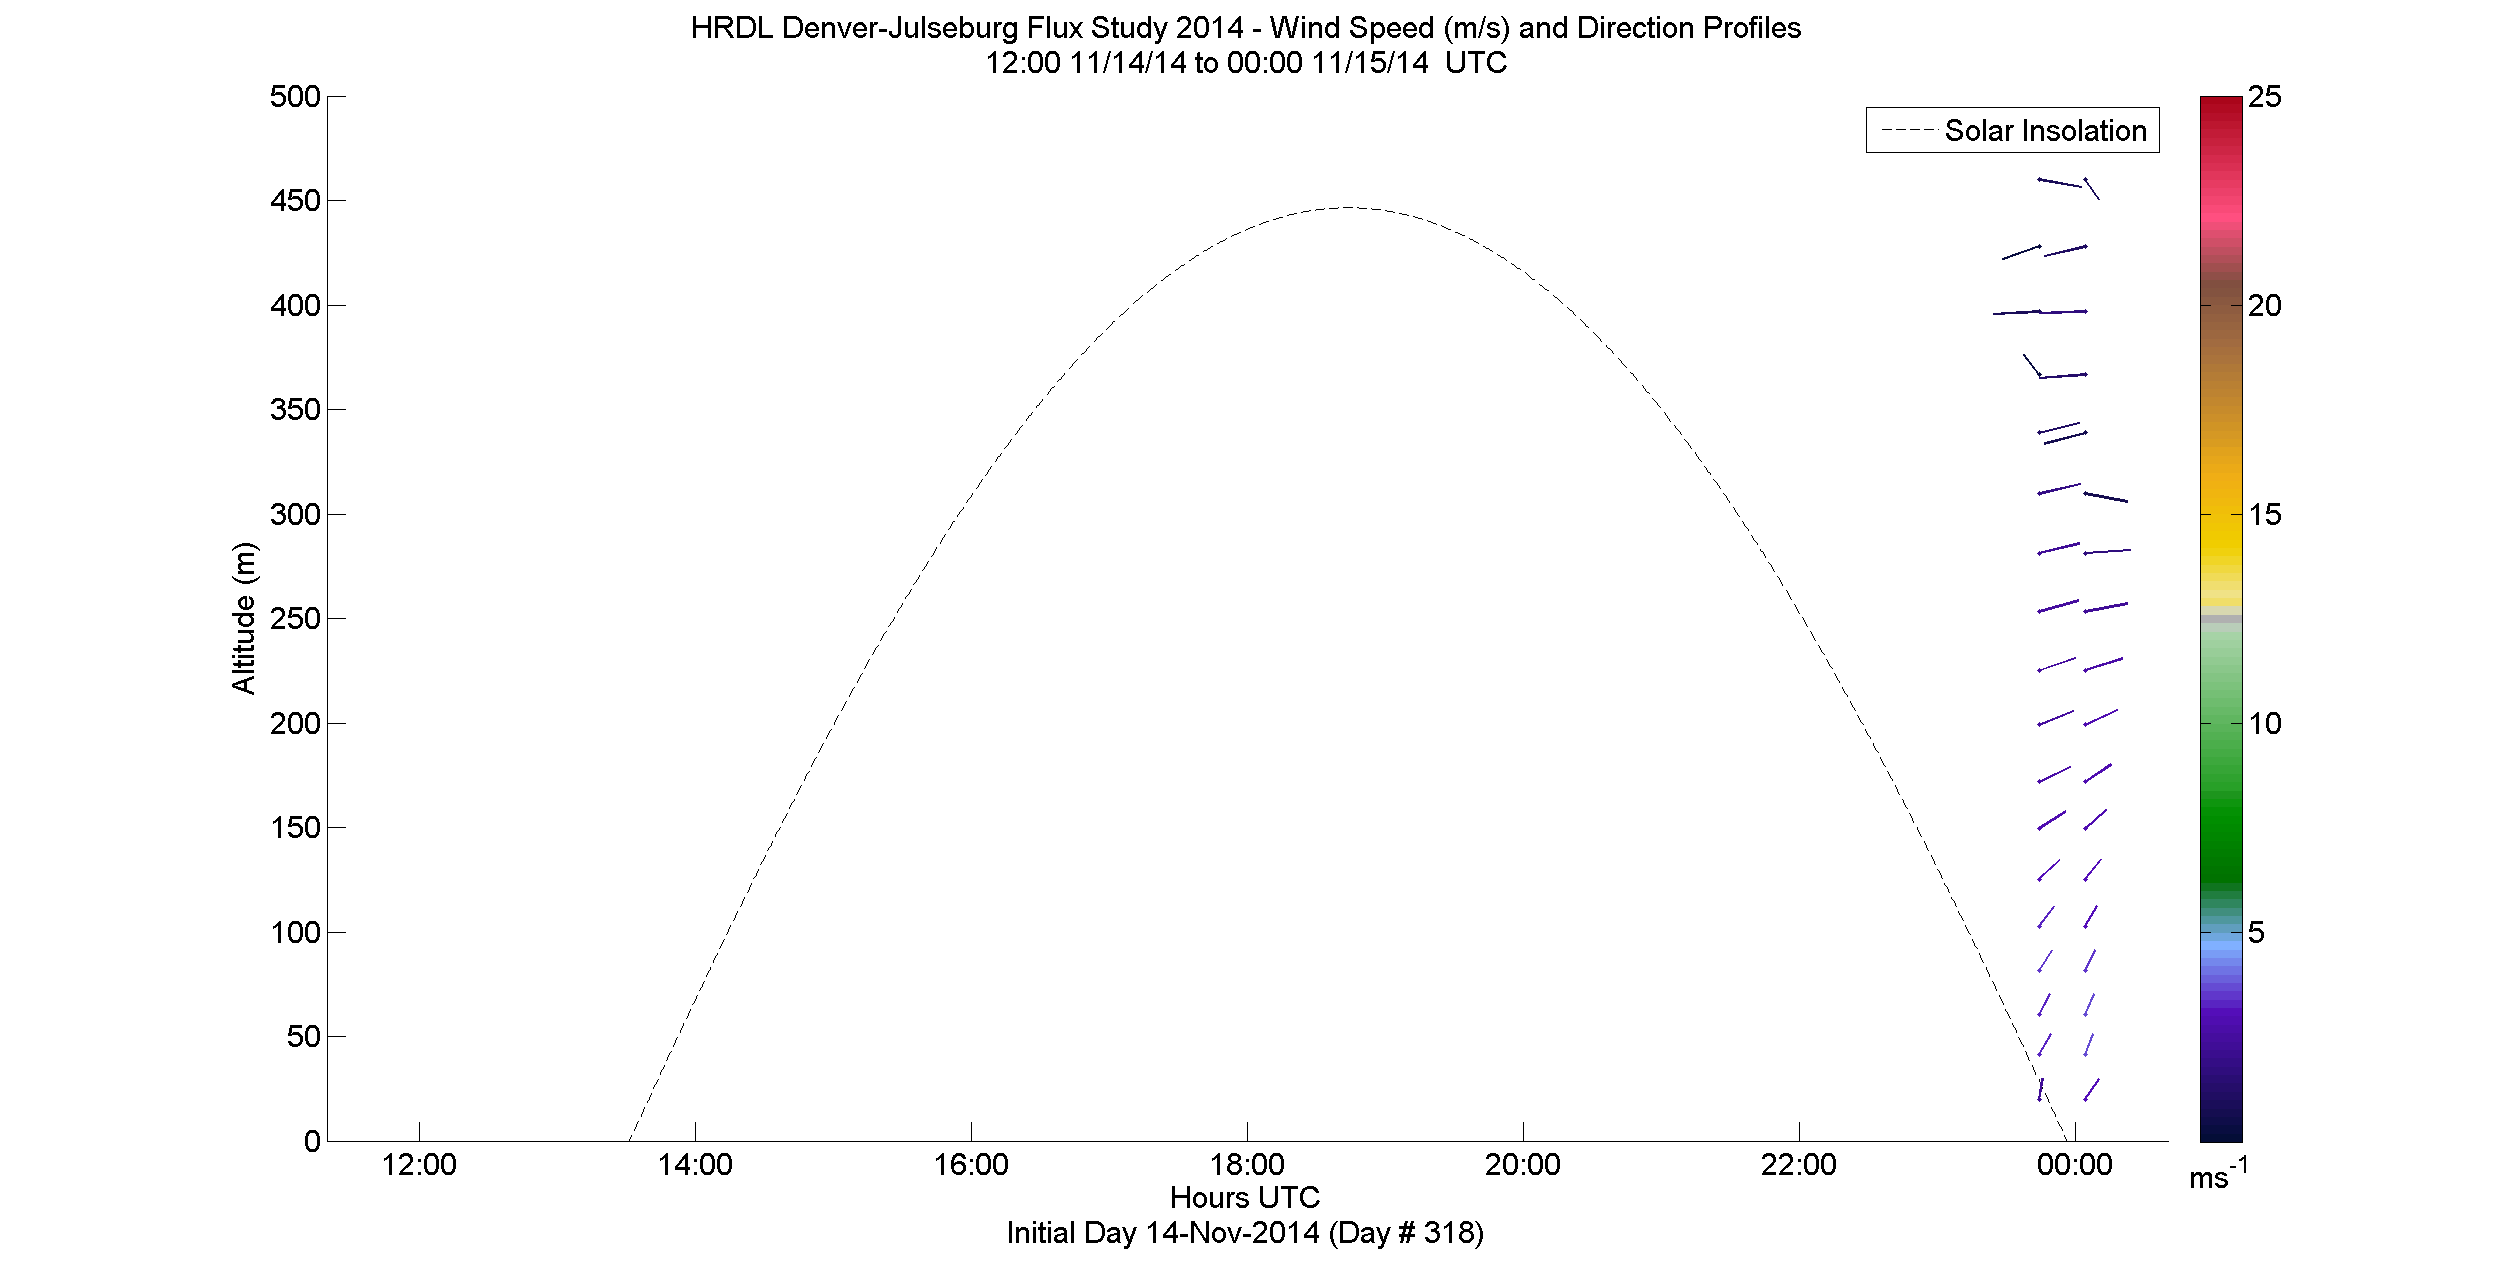 HRDL speed and direction profile - November 14 pm